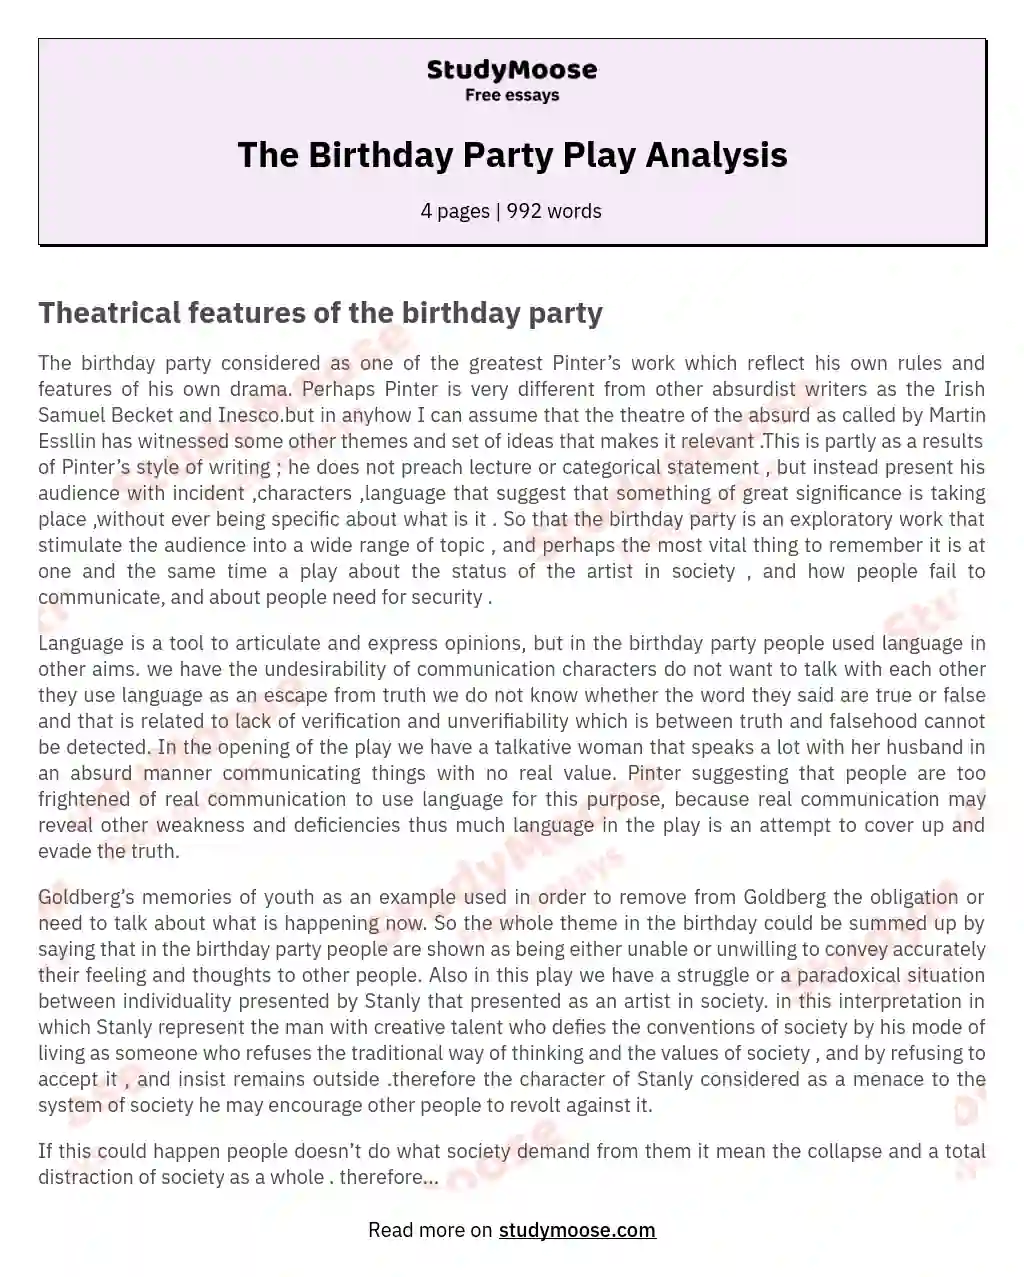 The Birthday Party Play Analysis